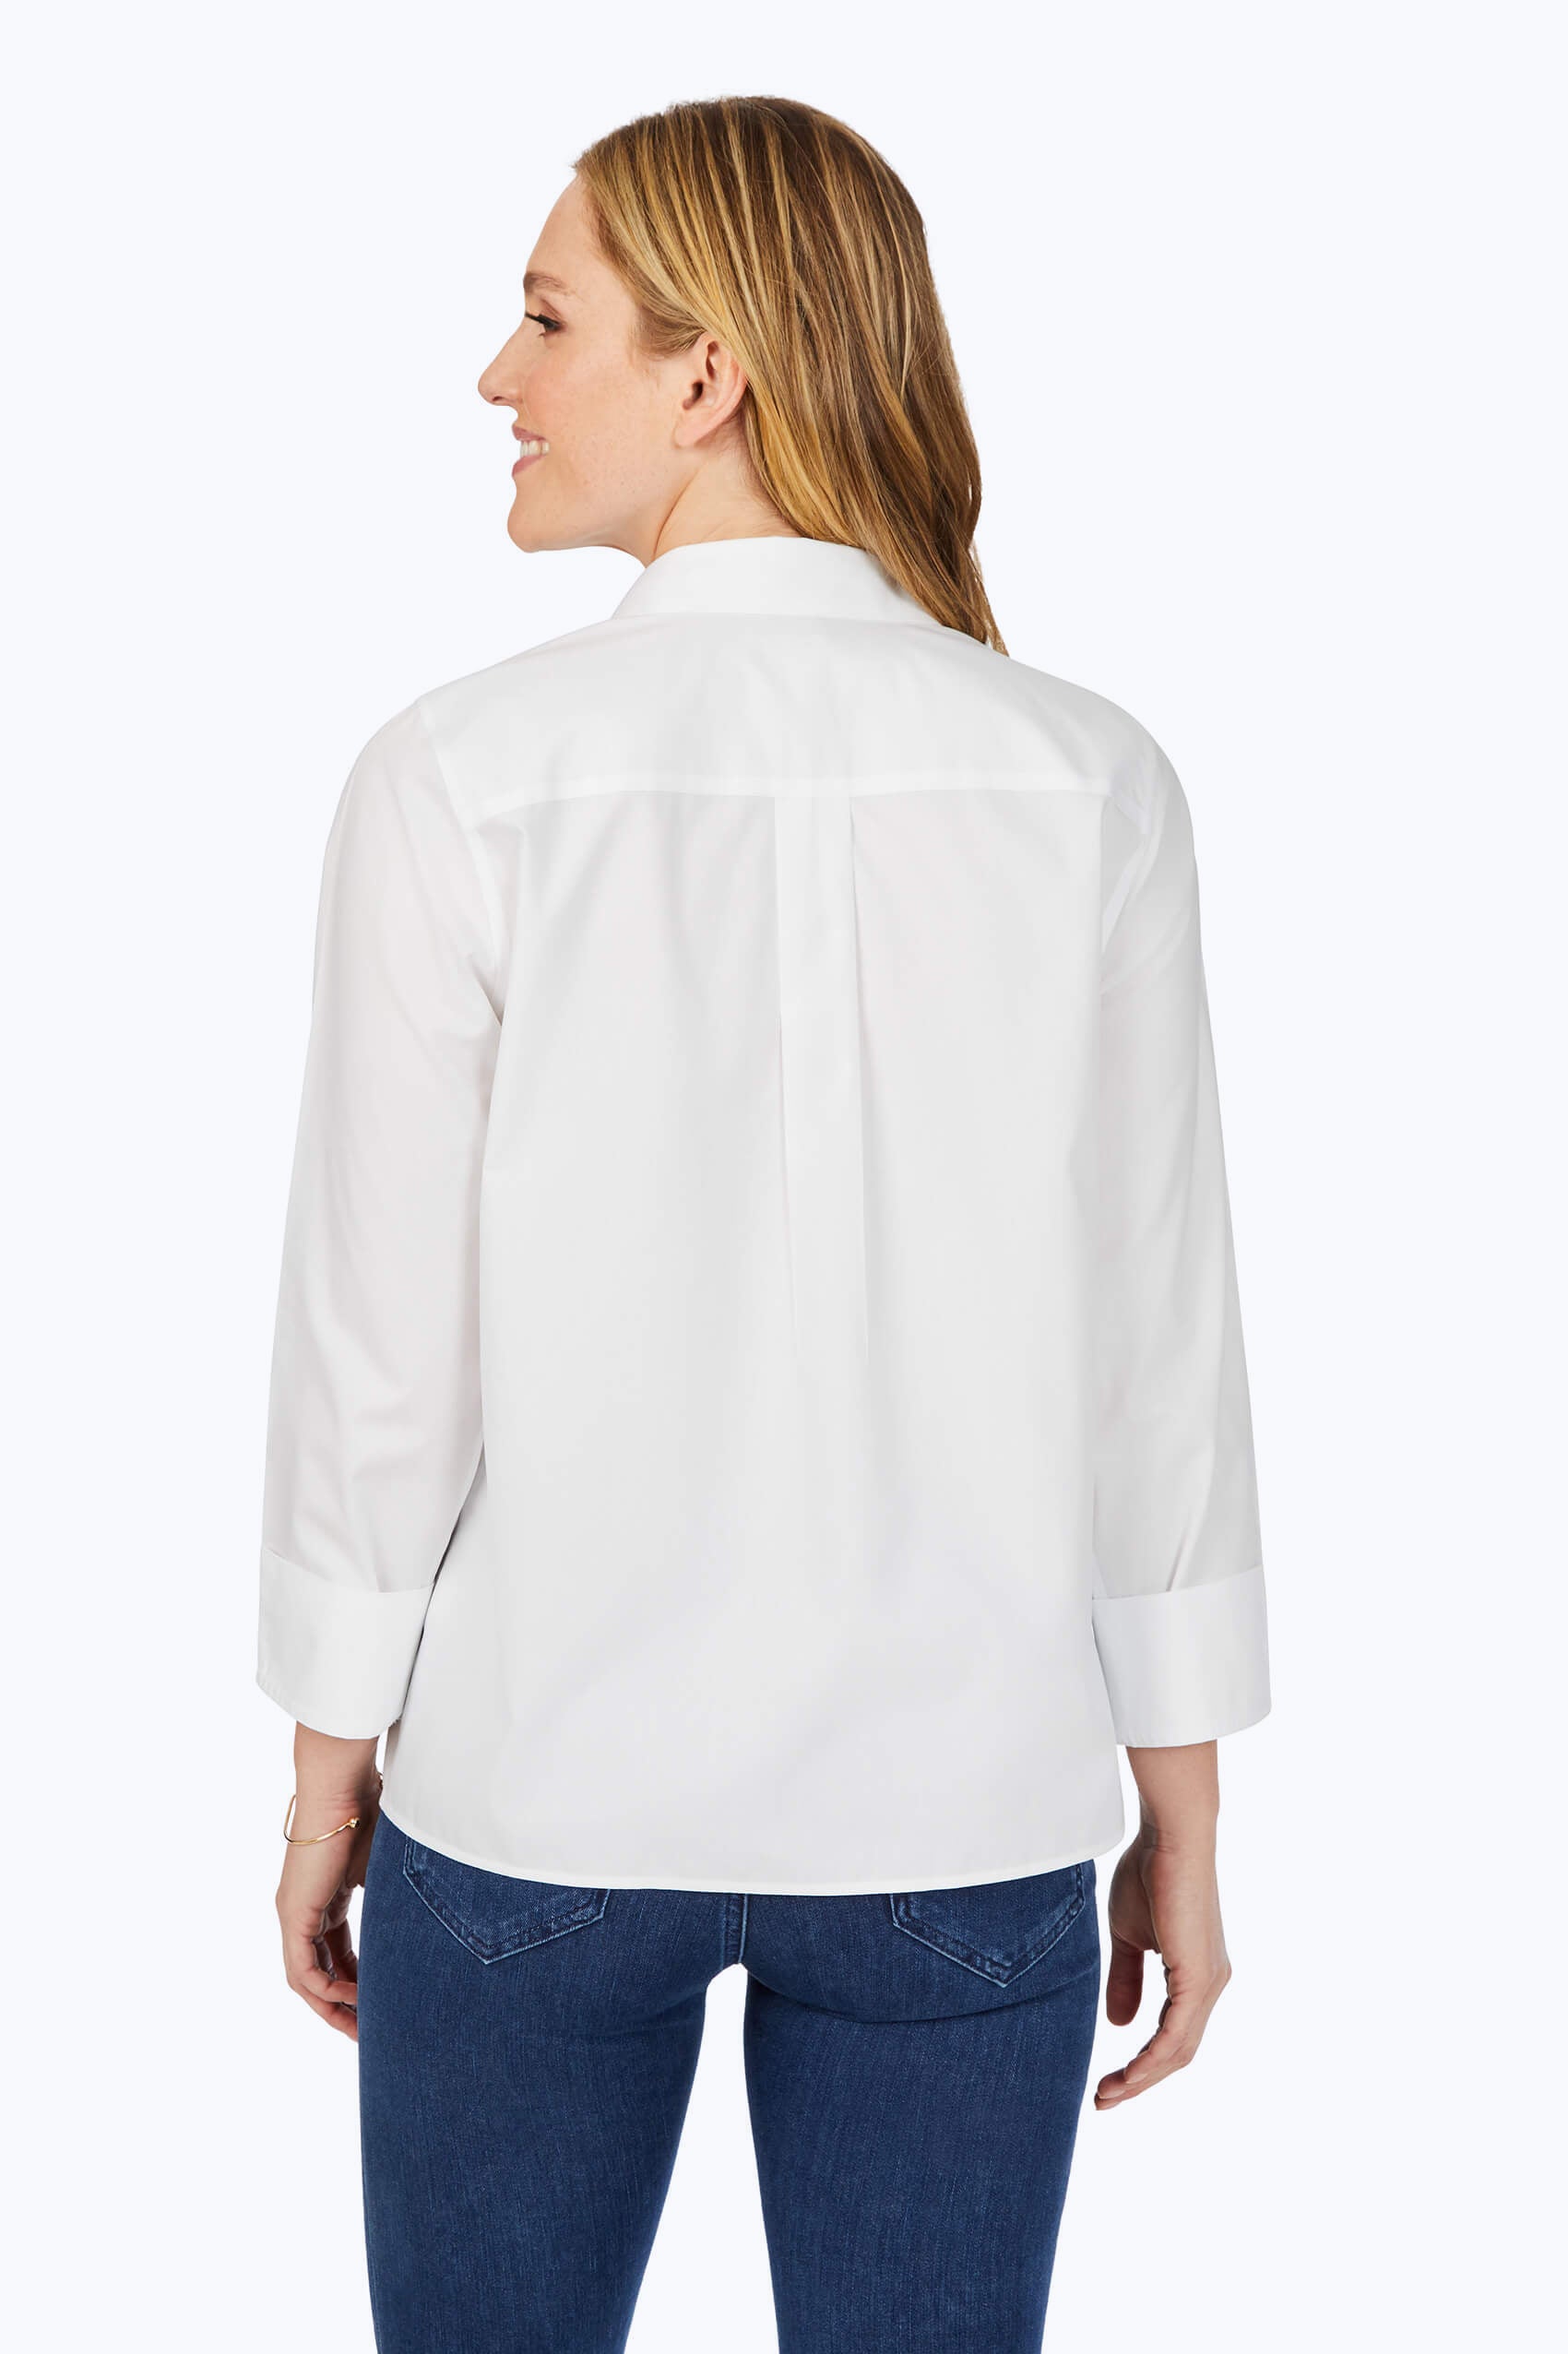 Pleated Pinpoint Non-Iron Shirt